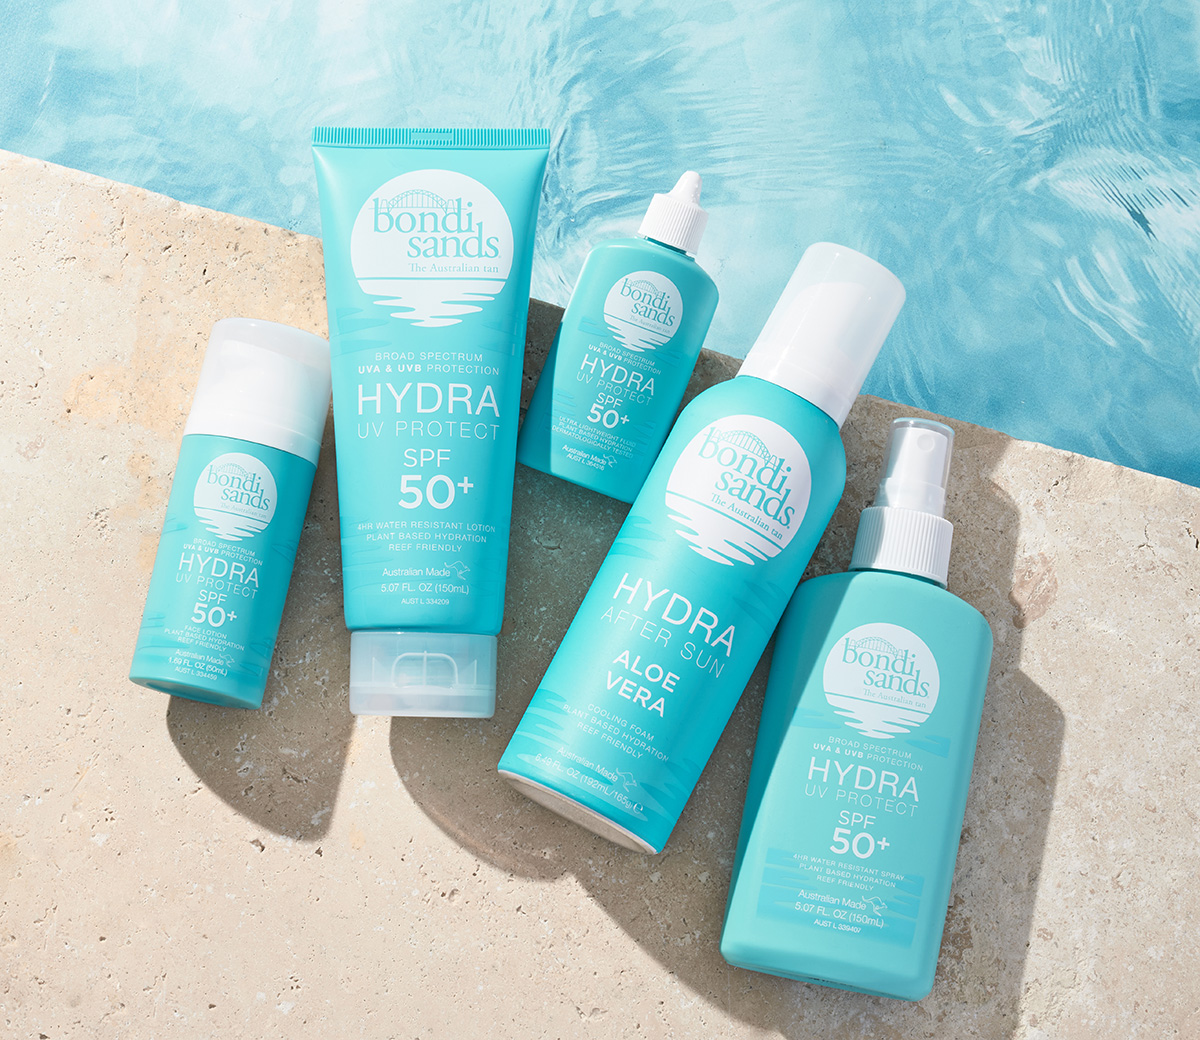 Be in to win a Bondi Sands Hydra SPF50+ pack!